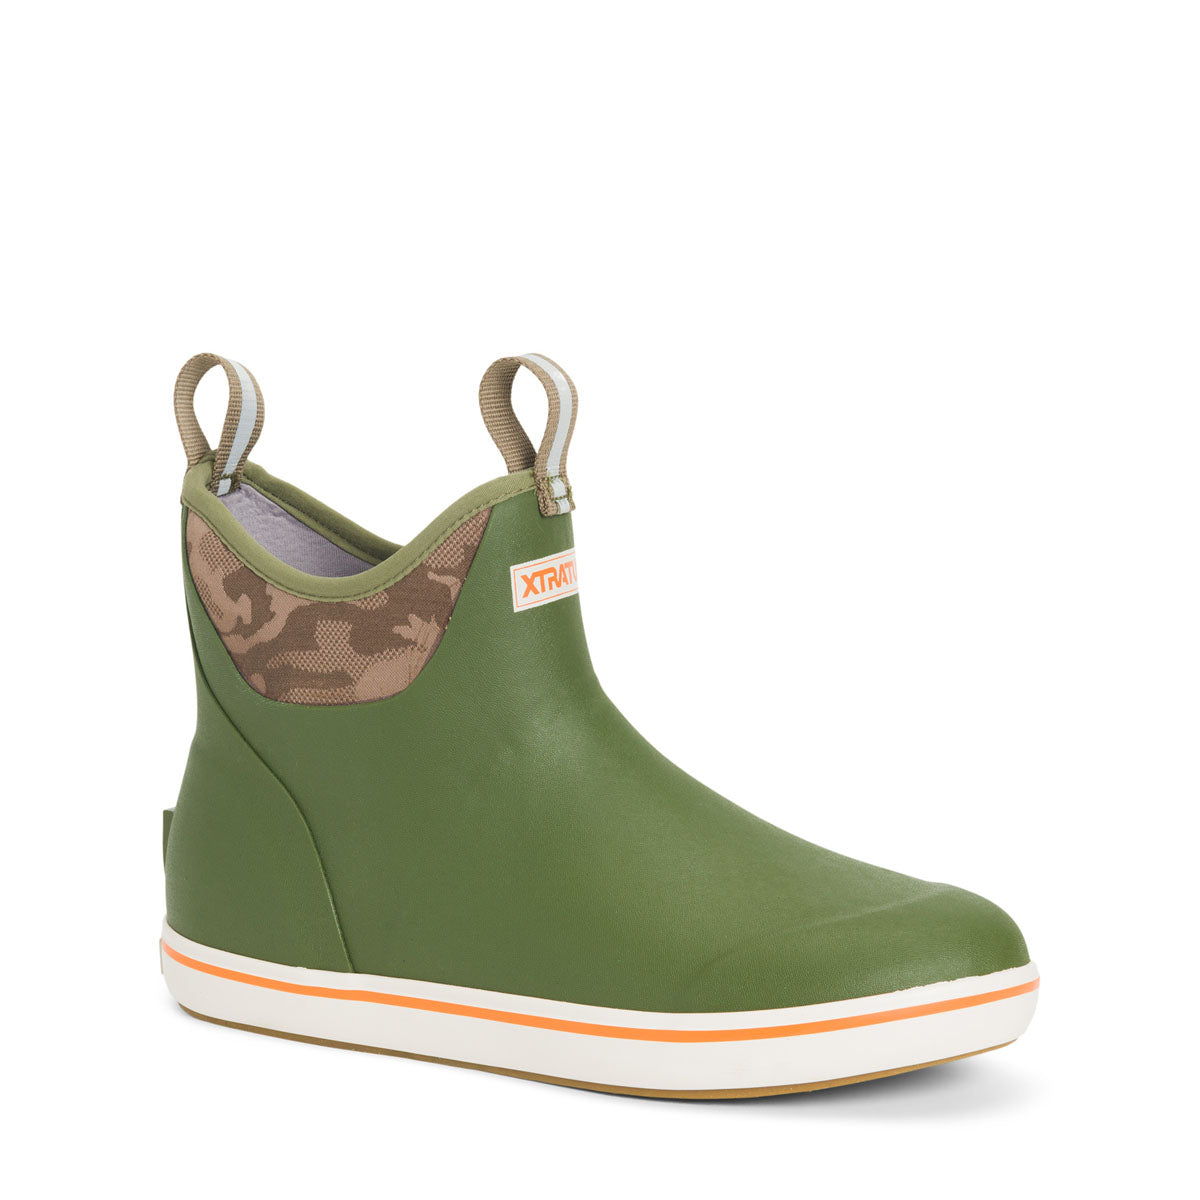 Men's Xtratuf 6" Ankle Deck Boot in Green Camo from the front